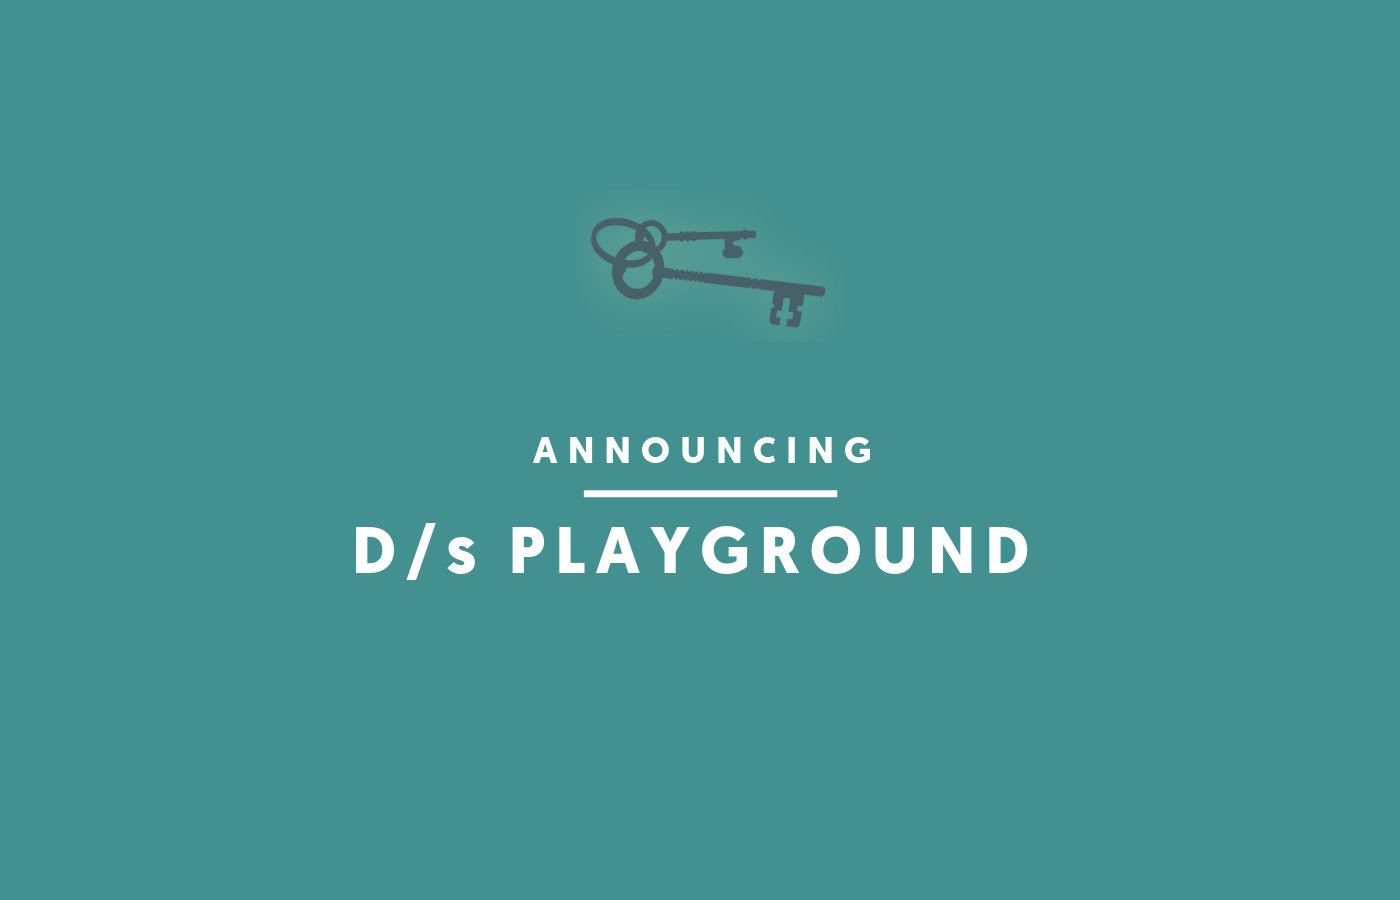 Announcing: D/s Playground! Summer 2019